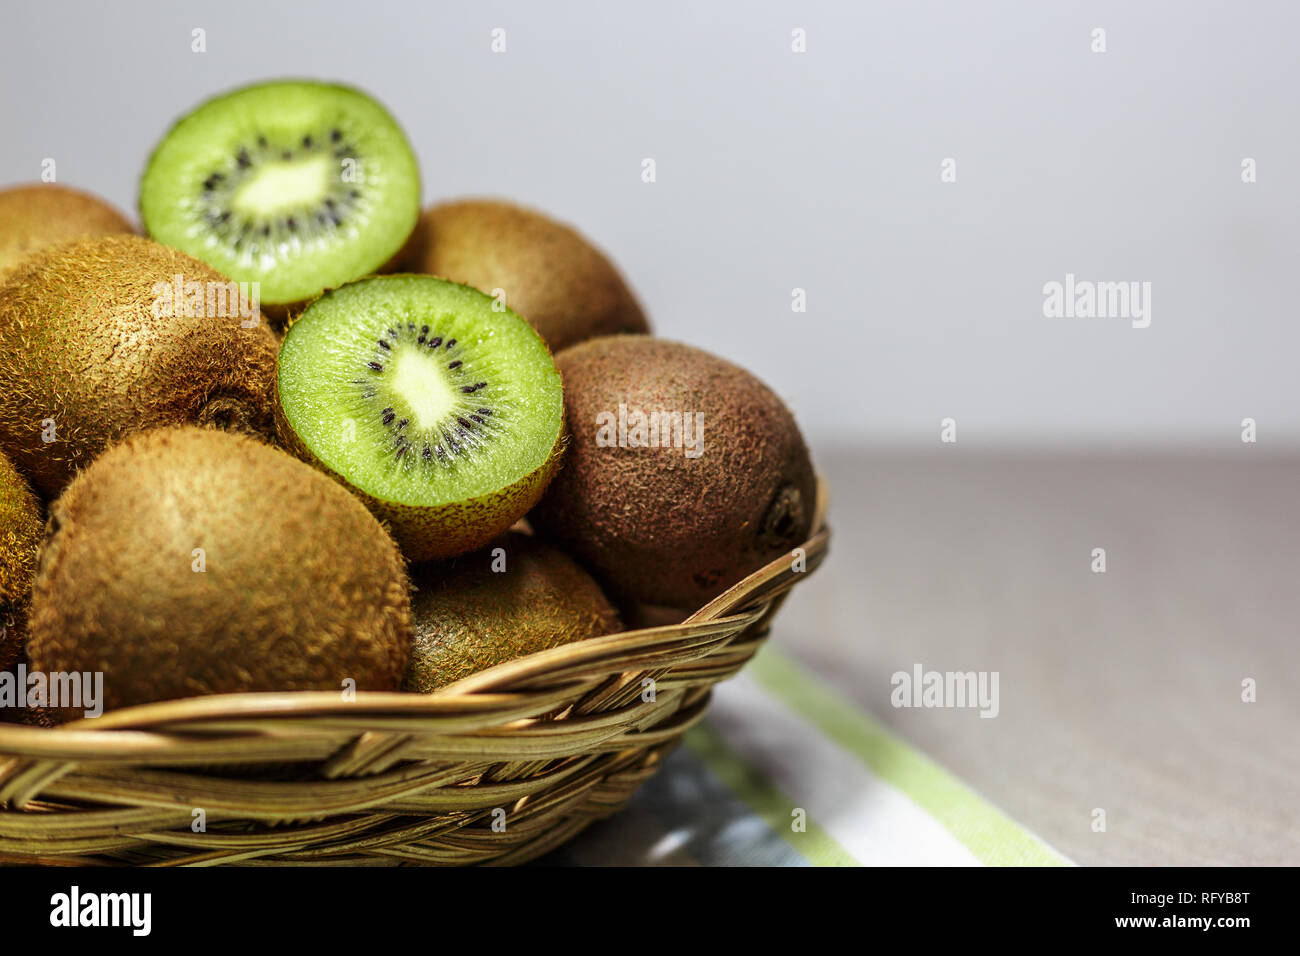 Ripe kiwi fruits in a basket. Healthy nutrition concept. Stock Photo